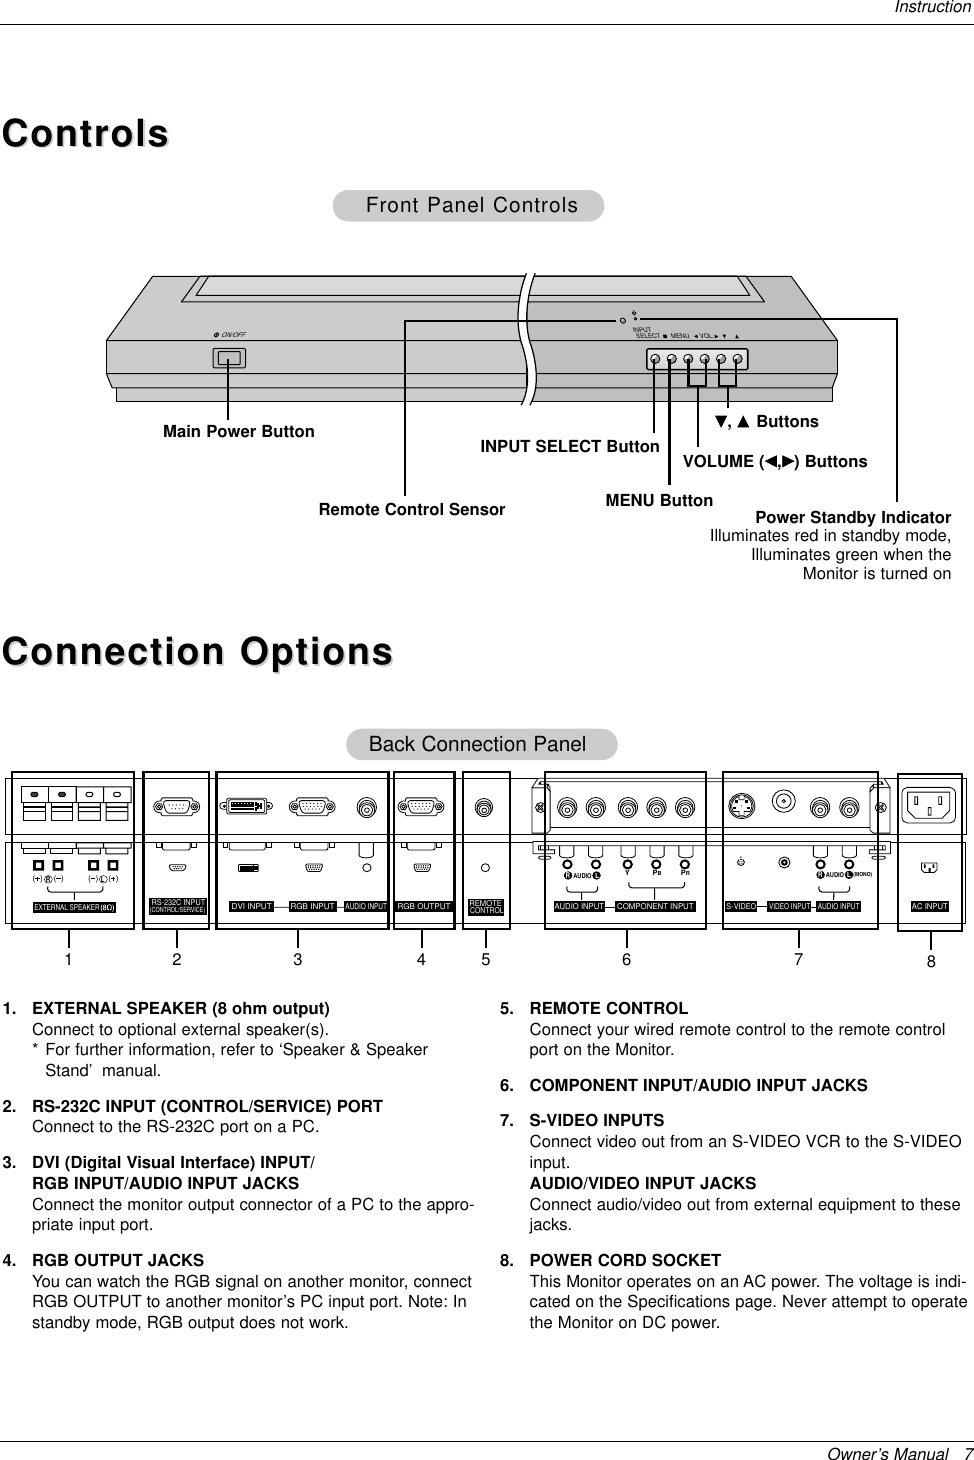 Owner’s Manual   7InstructionControlsControlsConnection OptionsConnection OptionsR(  )(  )(  )(  )LRS-232C INPUT(CONTROL/SERVICE)EXTERNAL SPEAKERYPBPR(MONO)RAUDIOLRAUDIOLS-VIDEOAC INPUTAUDIO INPUTVIDEO INPUTAUDIO INPUTAUDIO INPUTREMOTECONTROLCOMPONENT INPUTDVI INPUT RGB INPUT RGB OUTPUT11. EXTERNAL SPEAKER (8 ohm output)Connect to optional external speaker(s).* For further information, refer to ‘Speaker &amp; SpeakerStand’manual.2. RS-232C INPUT (CONTROL/SERVICE) PORTConnect to the RS-232C port on a PC.3. DVI (Digital Visual Interface) INPUT/RGB INPUT/AUDIO INPUT JACKSConnect the monitor output connector of a PC to the appro-priate input port.4. RGB OUTPUT JACKSYou can watch the RGB signal on another monitor, connectRGB OUTPUT to another monitor’s PC input port. Note: Instandby mode, RGB output does not work.5. REMOTE CONTROLConnect your wired remote control to the remote controlport on the Monitor.6. COMPONENT INPUT/AUDIO INPUT JACKS7. S-VIDEO INPUTSConnect video out from an S-VIDEO VCR to the S-VIDEOinput.AUDIO/VIDEO INPUT JACKSConnect audio/video out from external equipment to thesejacks.8. POWER CORD SOCKETThis Monitor operates on an AC power. The voltage is indi-cated on the Specifications page. Never attempt to operatethe Monitor on DC power.Back Connection PanelVOL.MENUINPUT SELECTON/OFFMain Power Button INPUT SELECT Button VOLUME (F,G) ButtonsPower Standby IndicatorIlluminates red in standby mode,Illuminates green when theMonitor is turned onRemote Control Sensor MENU ButtonE, D ButtonsFront Panel ControlsFront Panel Controls2 4 53 7 86